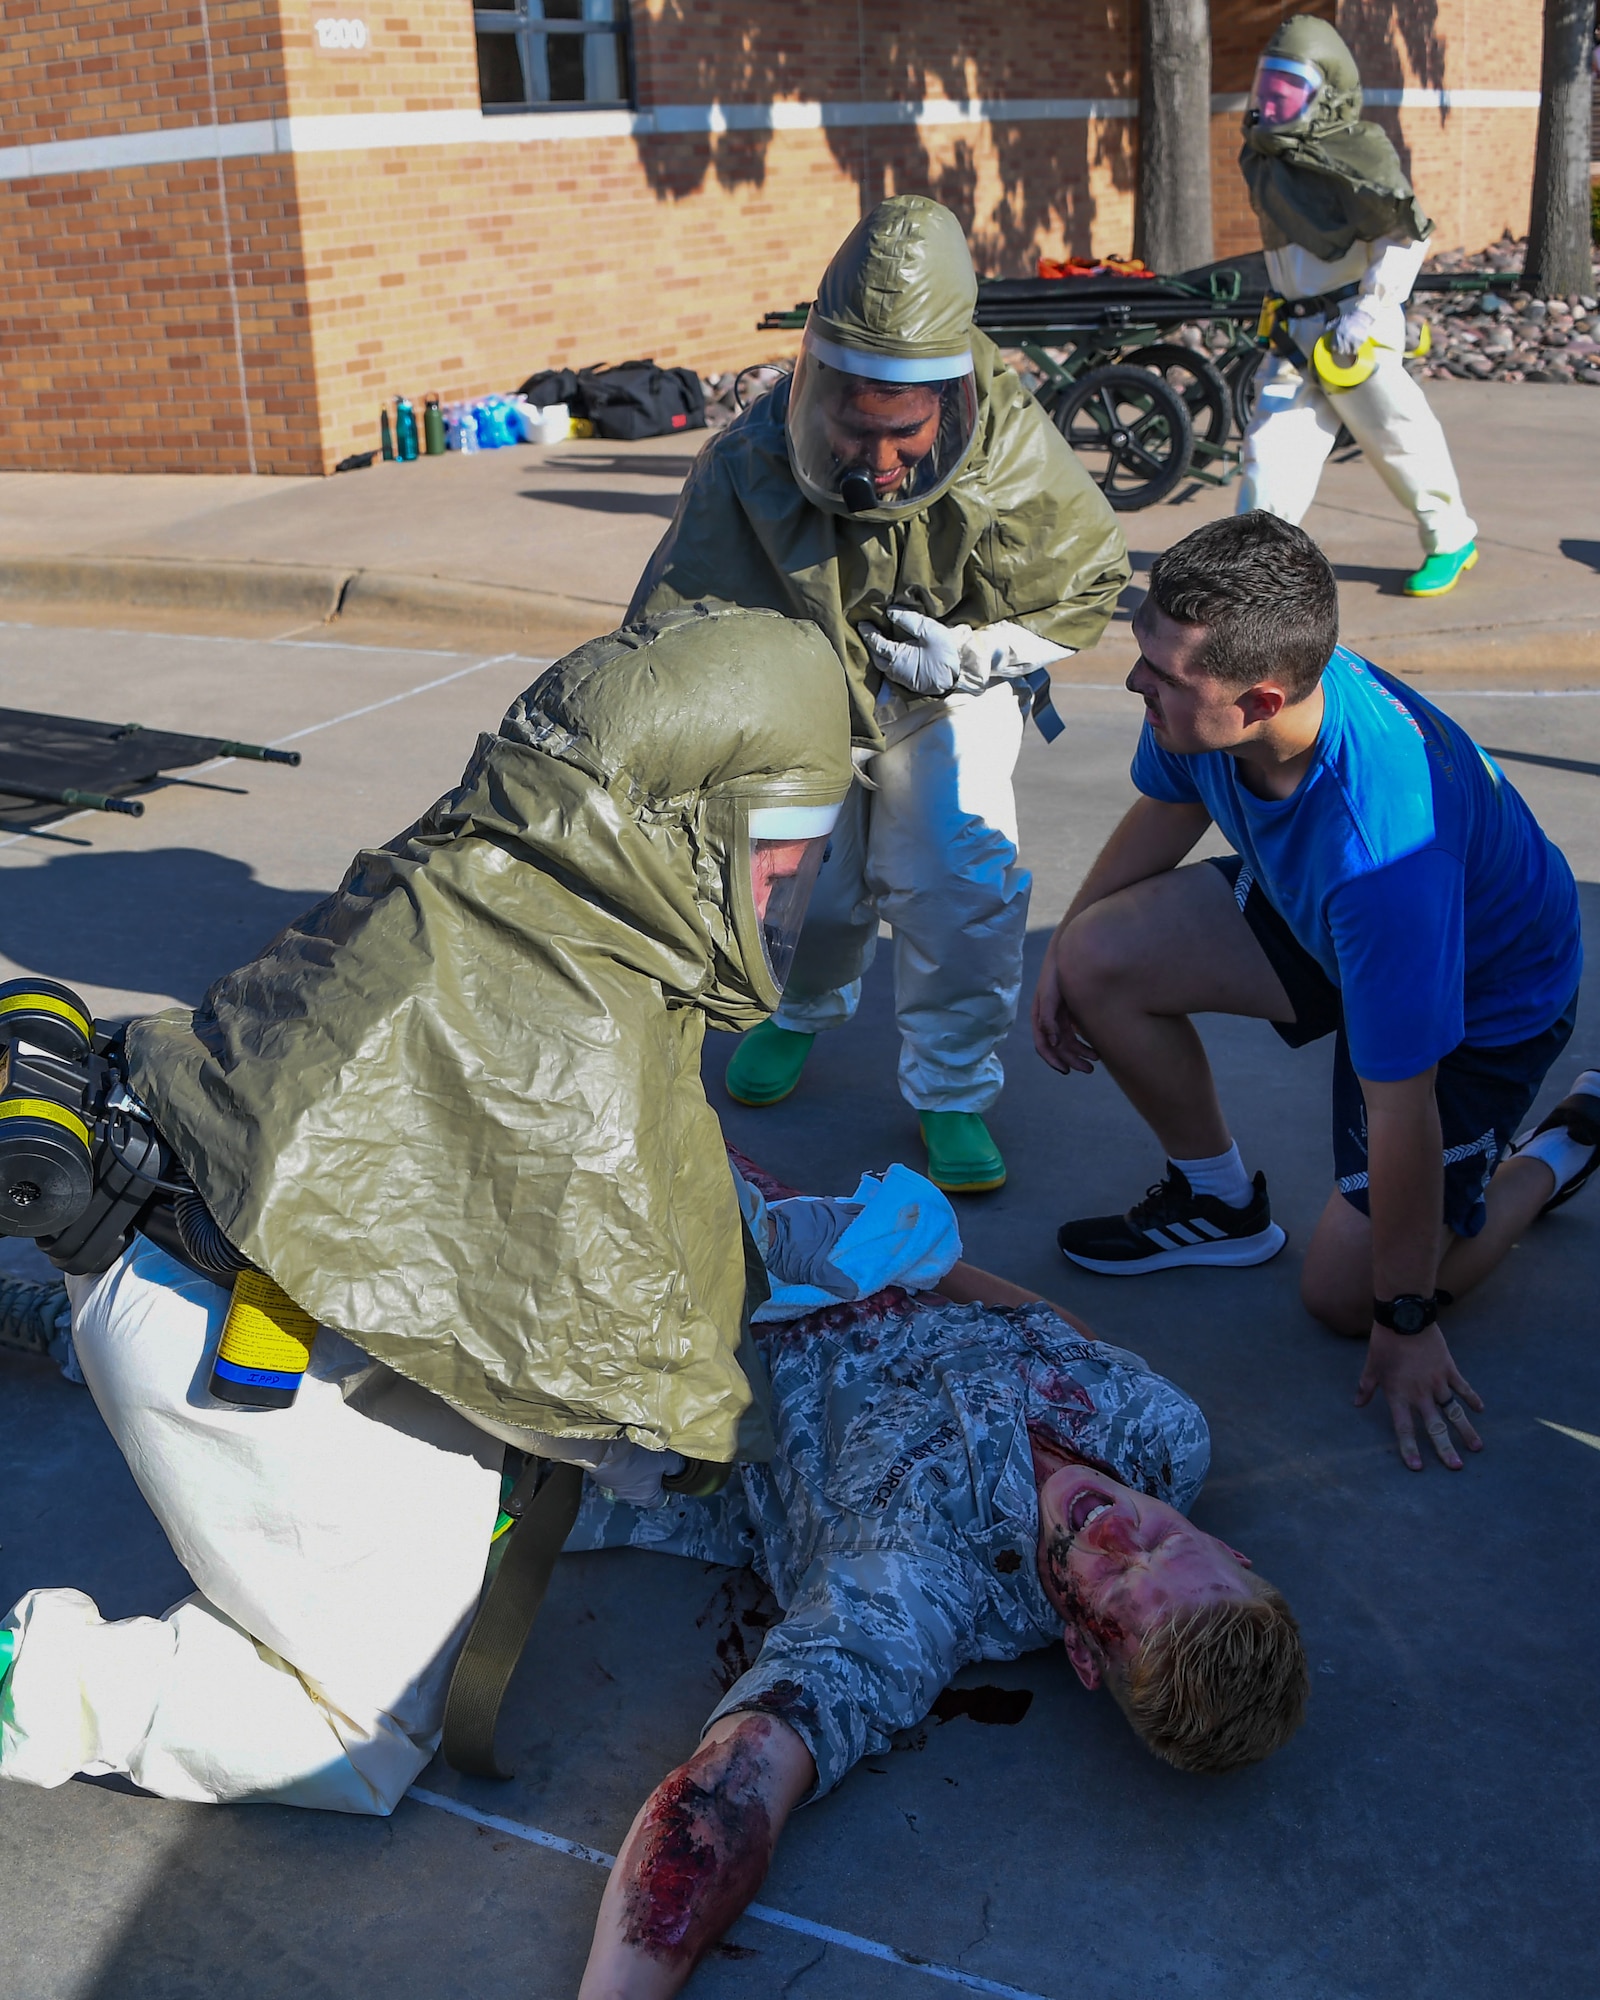 Manpower and security team assist patient during exercise